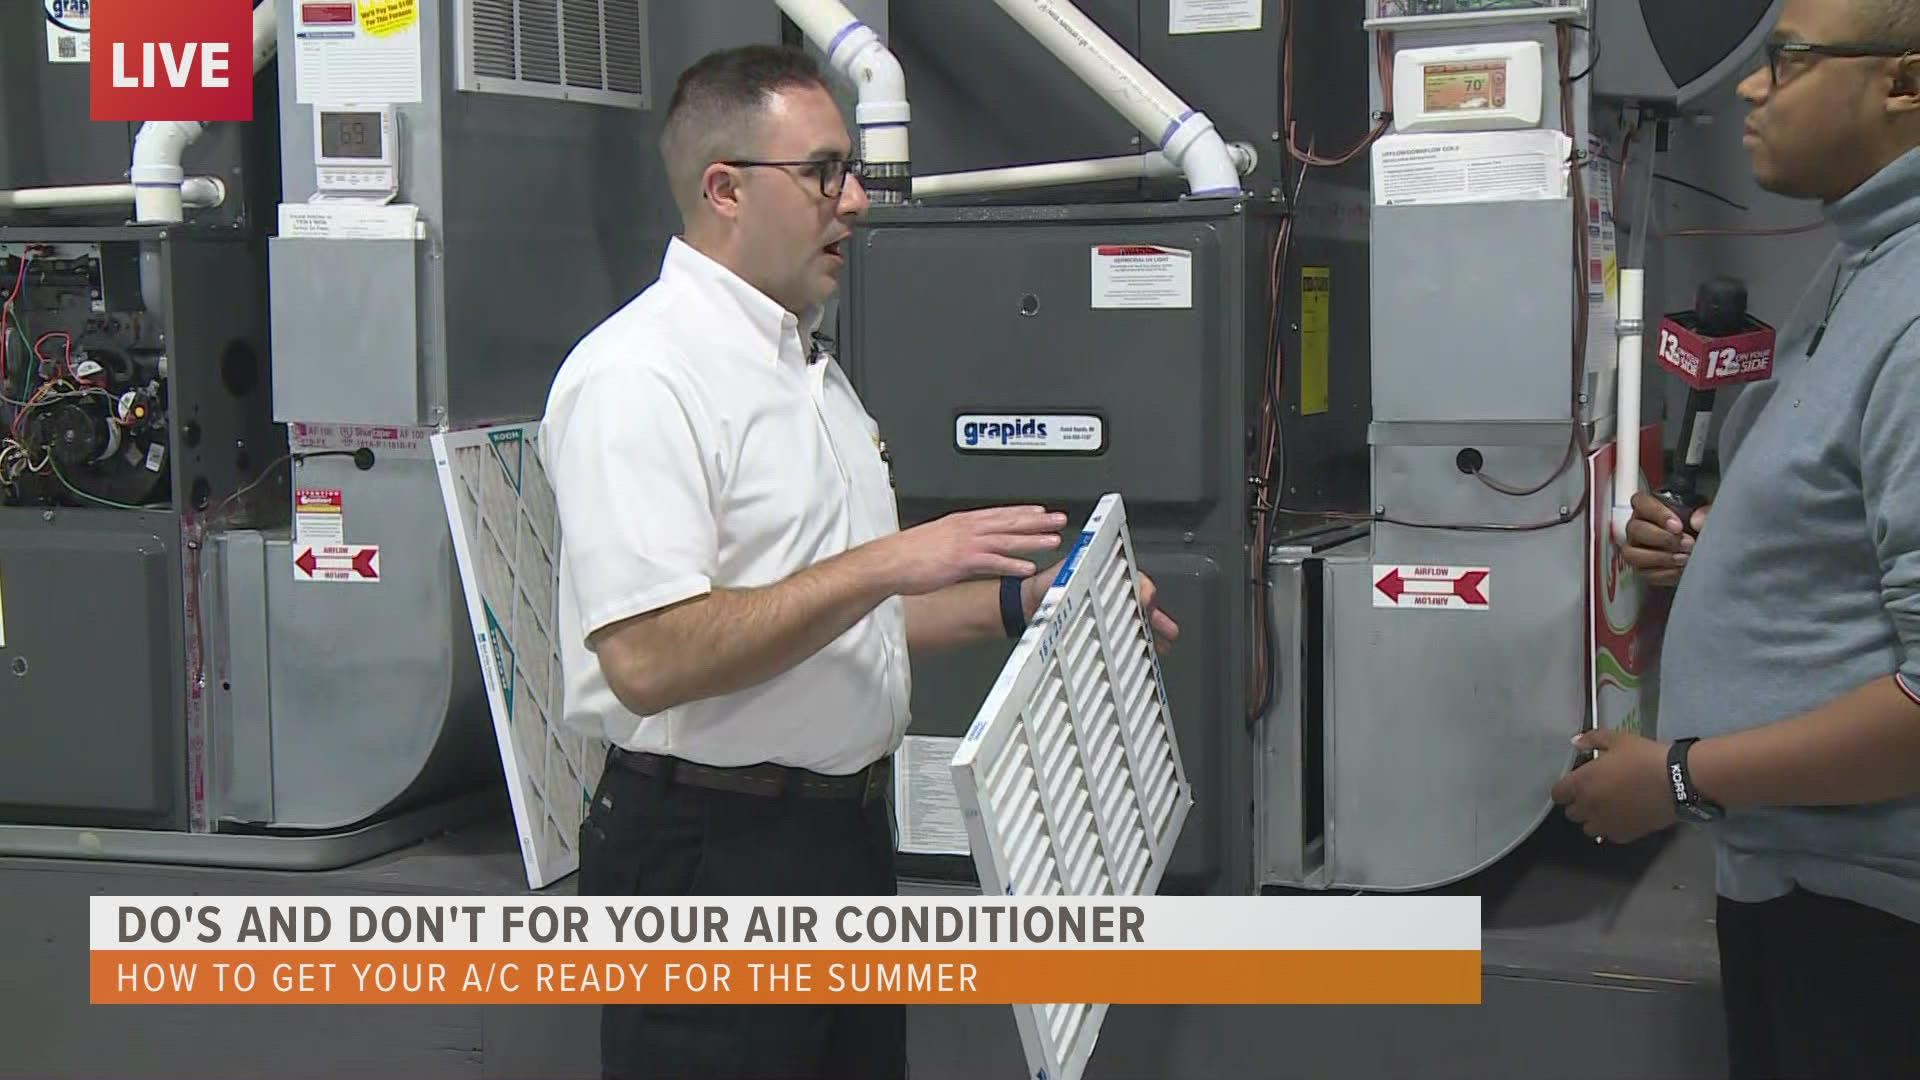 Similar to your furnace, there are some routine maintenance checks you should do for your air conditioner. We spoke to an expert for tips.